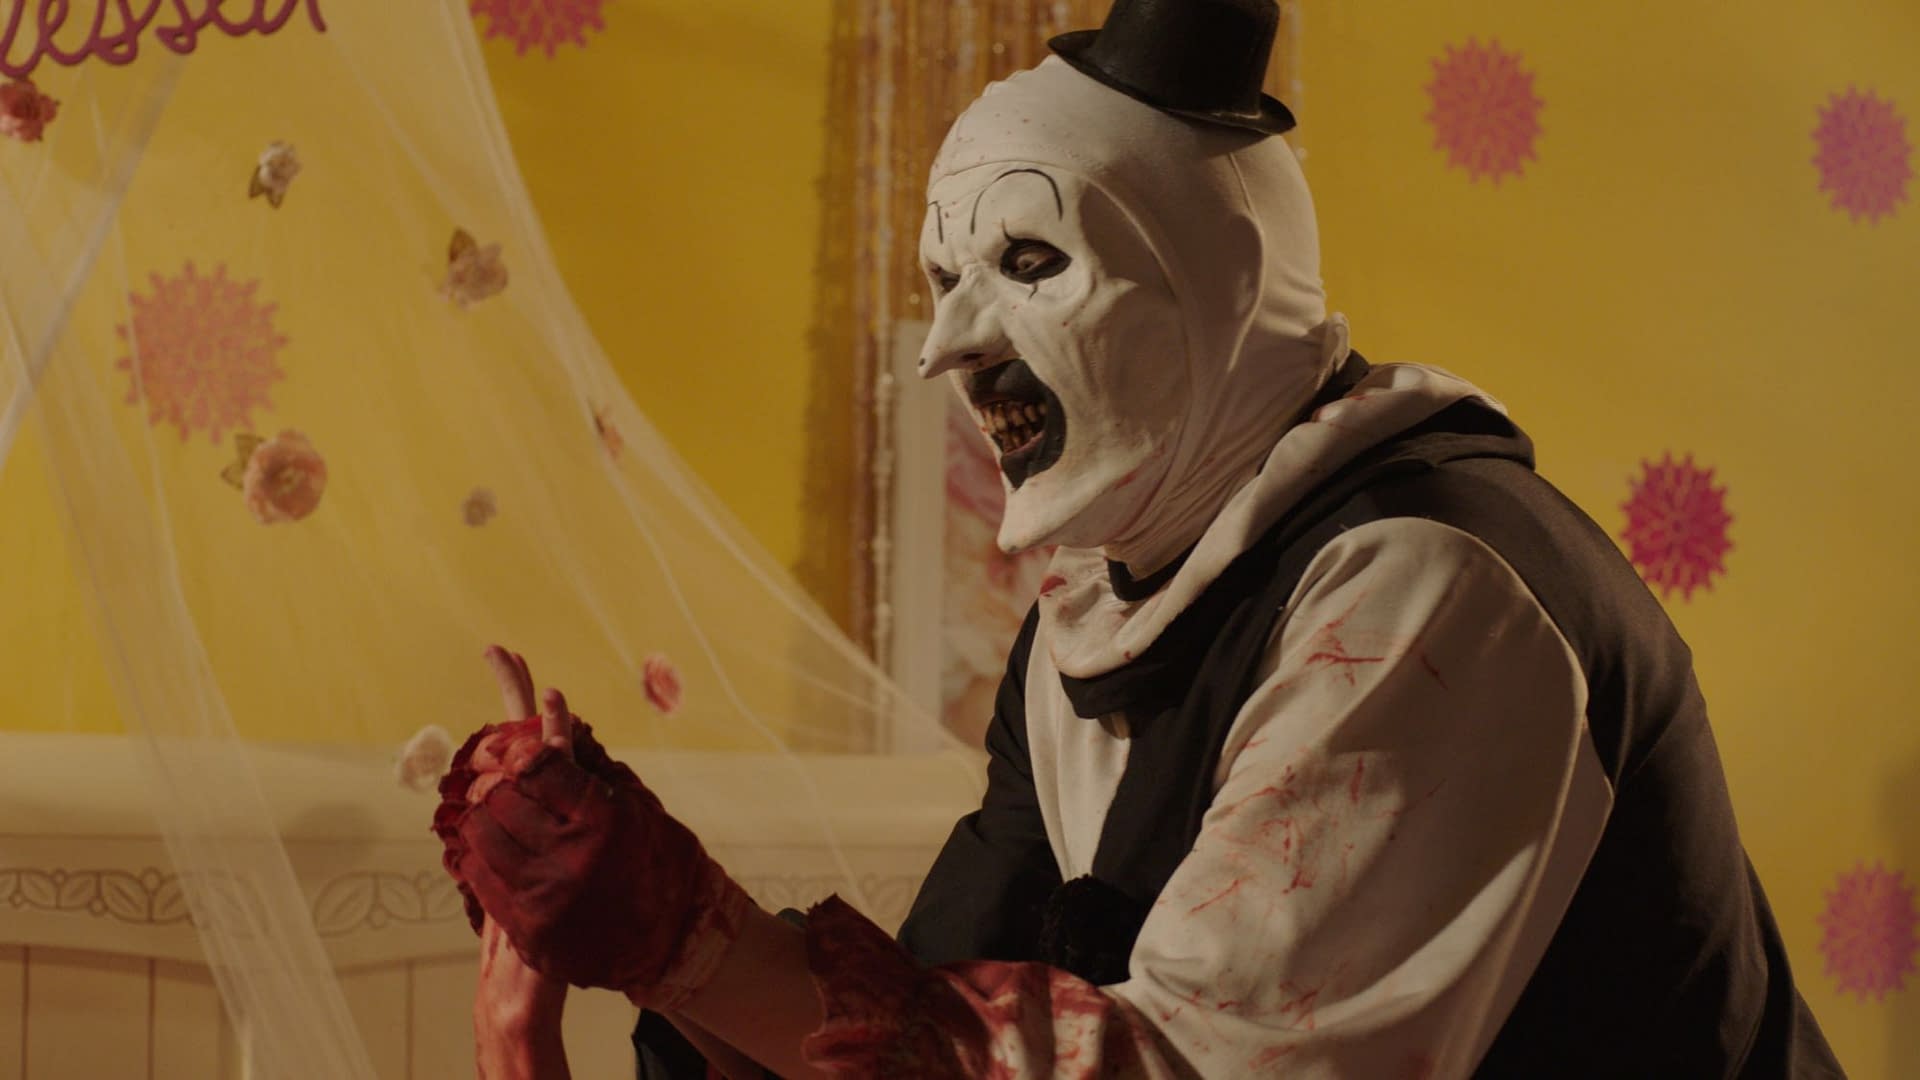 Terrifier 2 Looks Just As Insane As The First, Check Out The Trailer